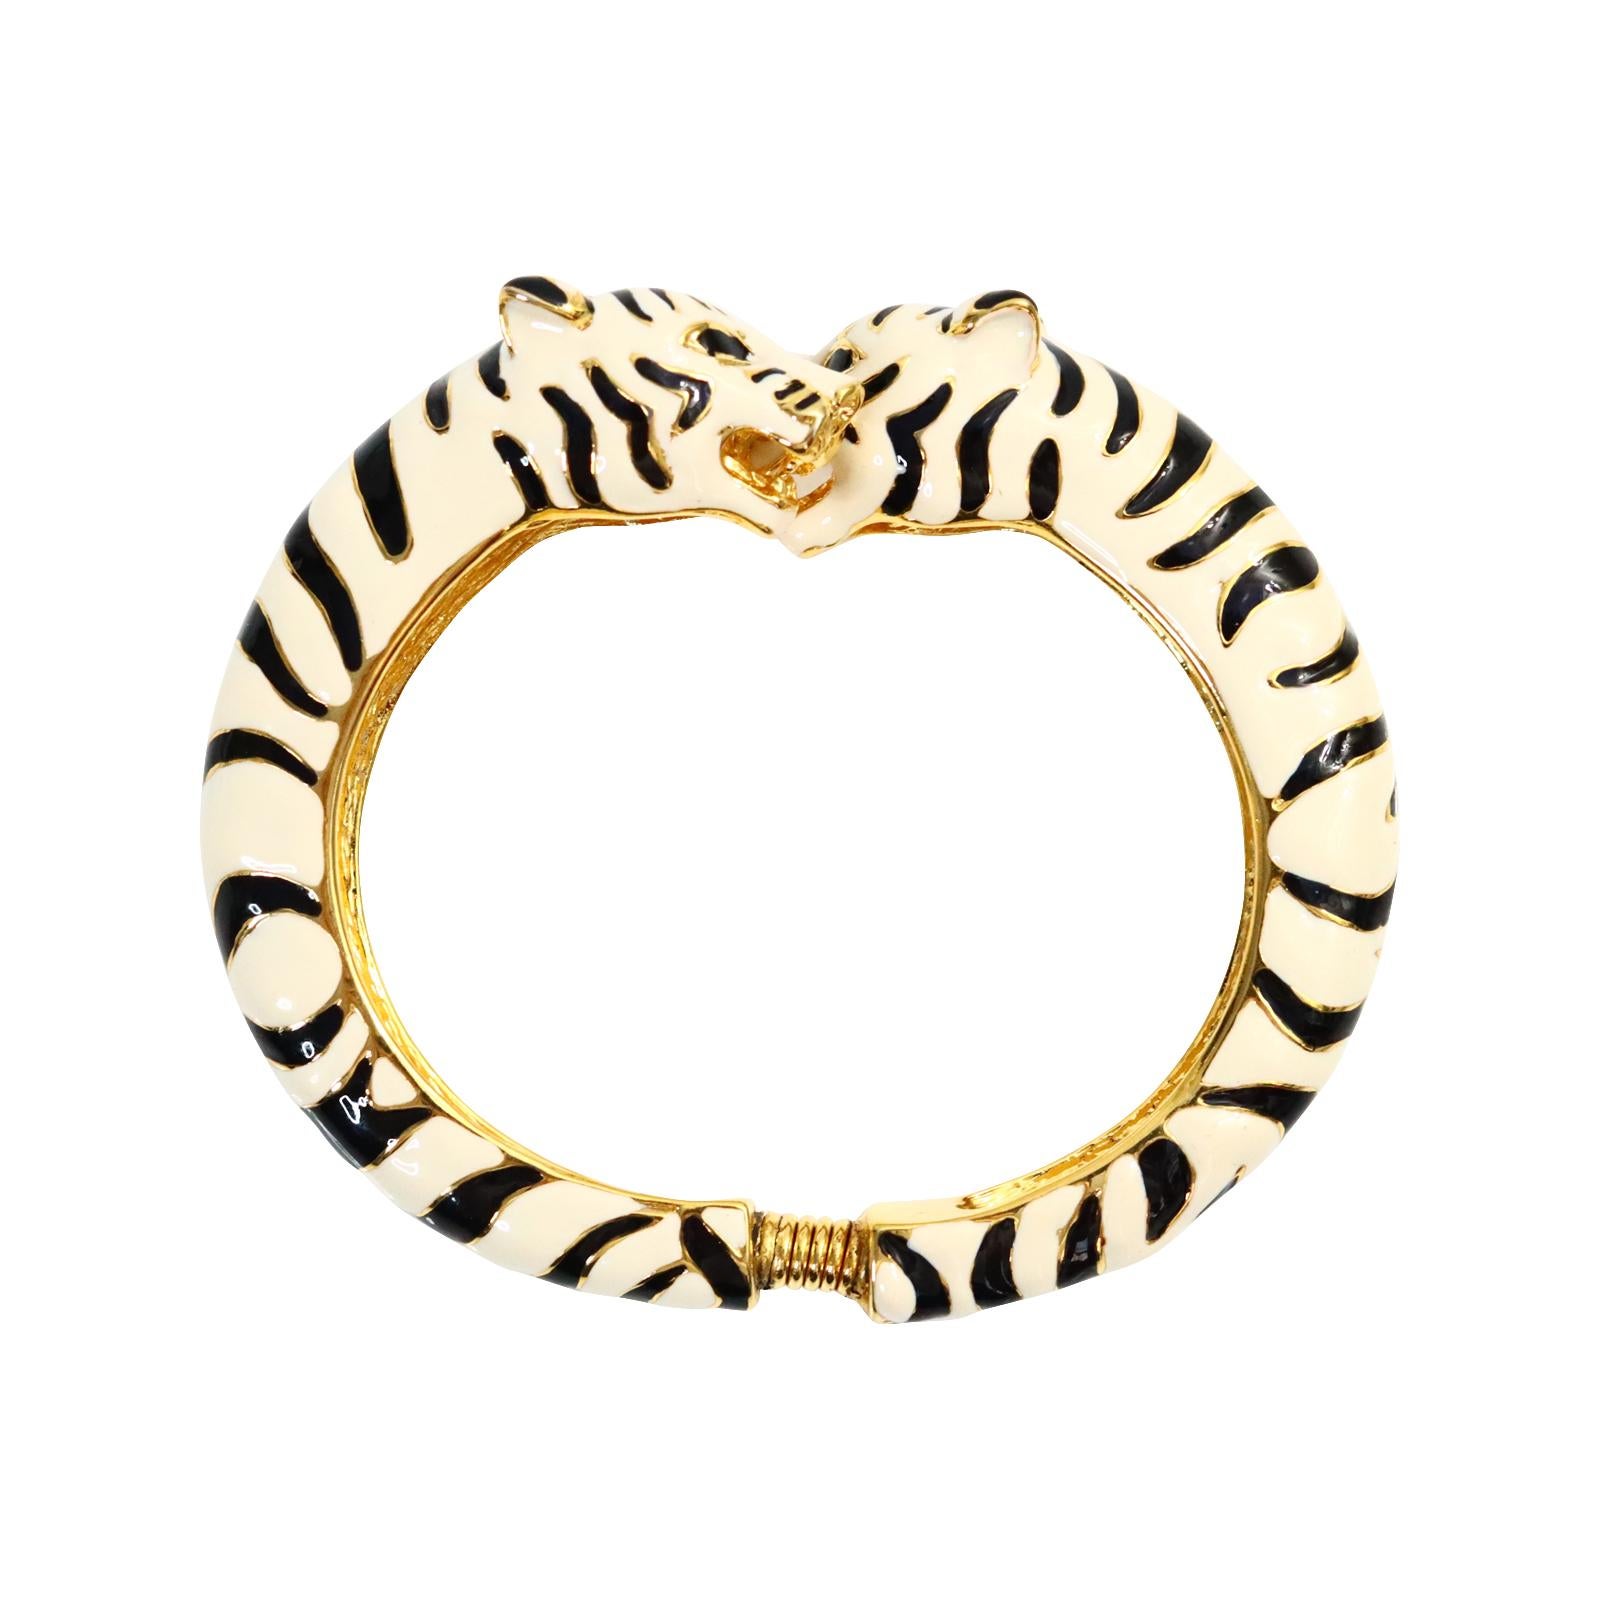 Vintage KJL Leopard Black and White Enamel Double Head Clamper Circa 1980s.  This is such a cute statement piece that looks amazing mixed with gold pieces stacked or with other enamel colors of any and all sorts. This bracelet never goes out of